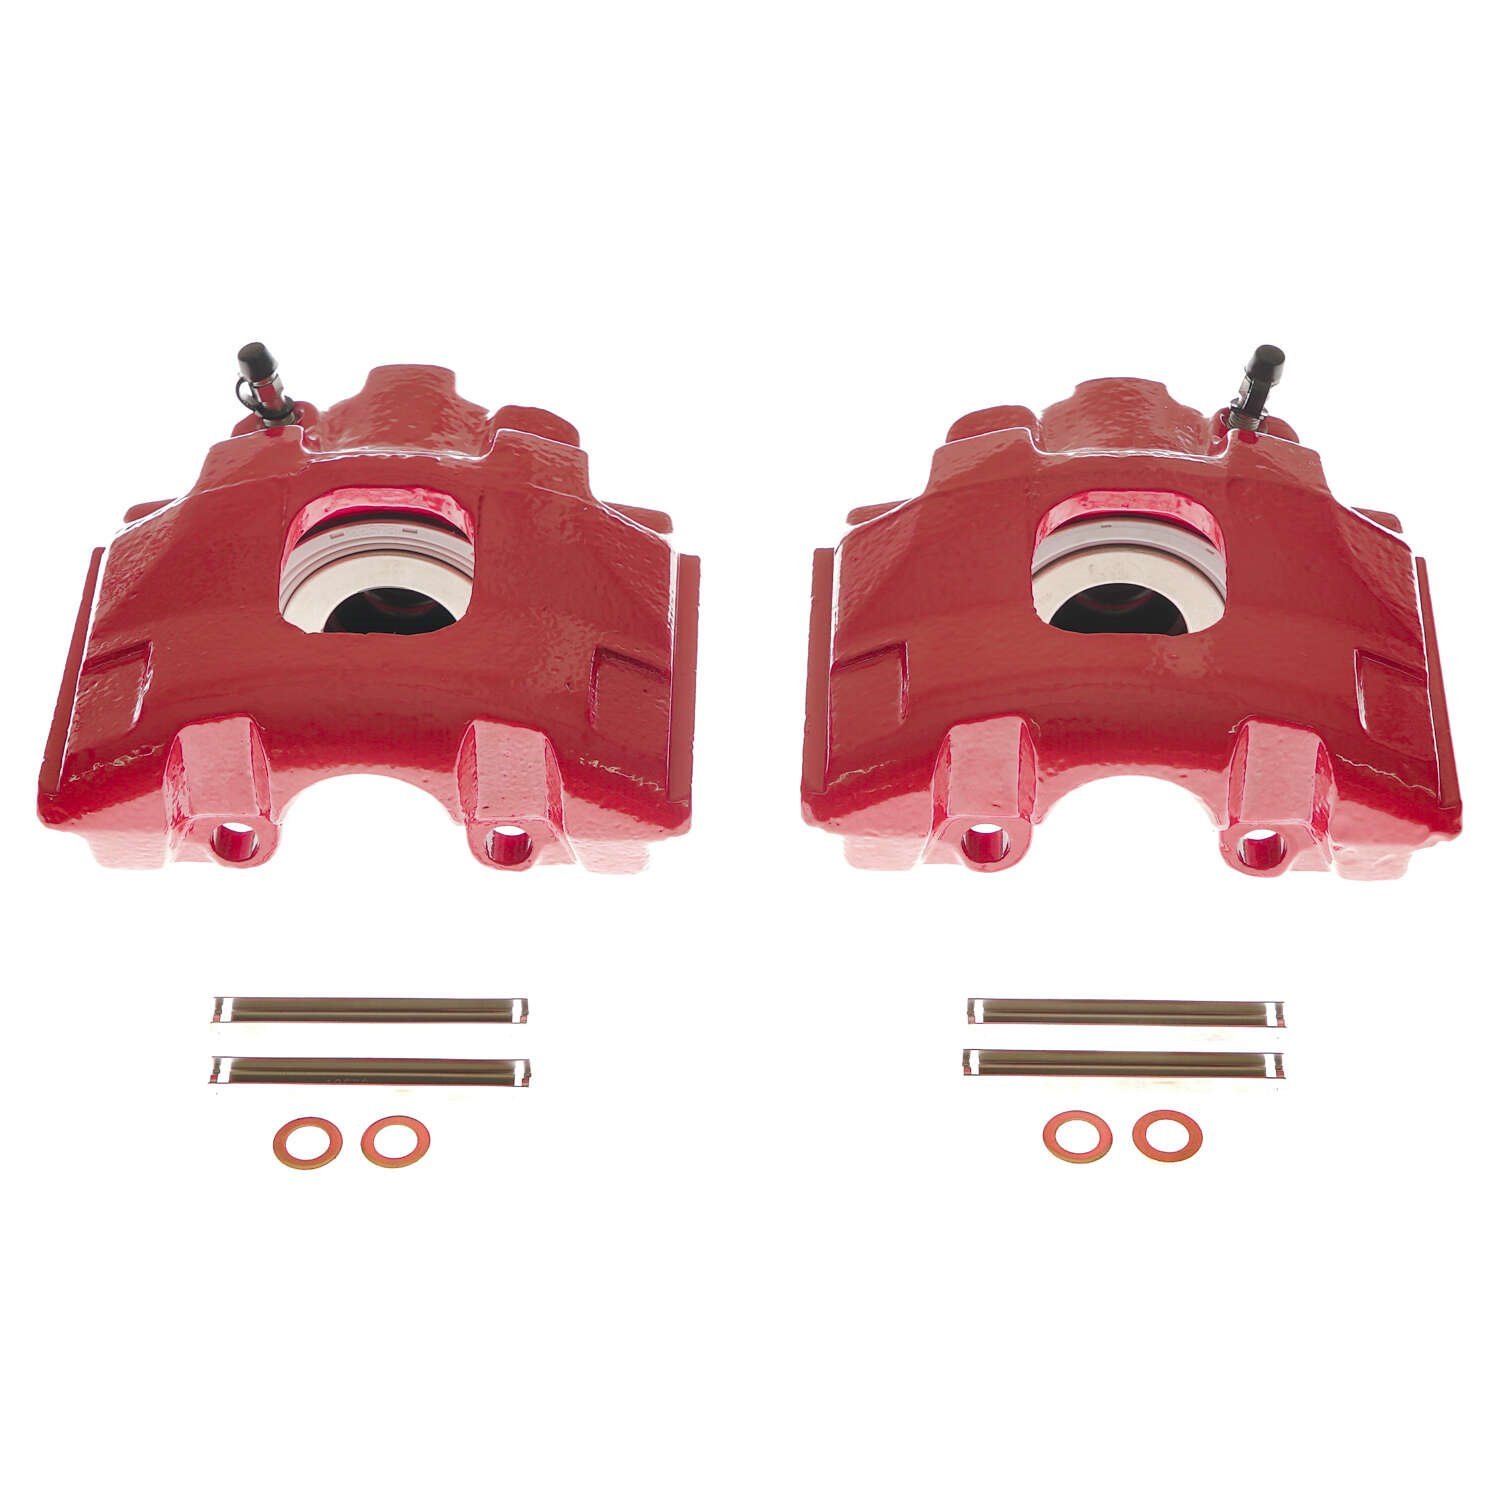 Front Performance Brake Calipers Fits Select 1998-2005 Mercedes ML320, ML350, ML430 [Red Powder-Coat Finish]